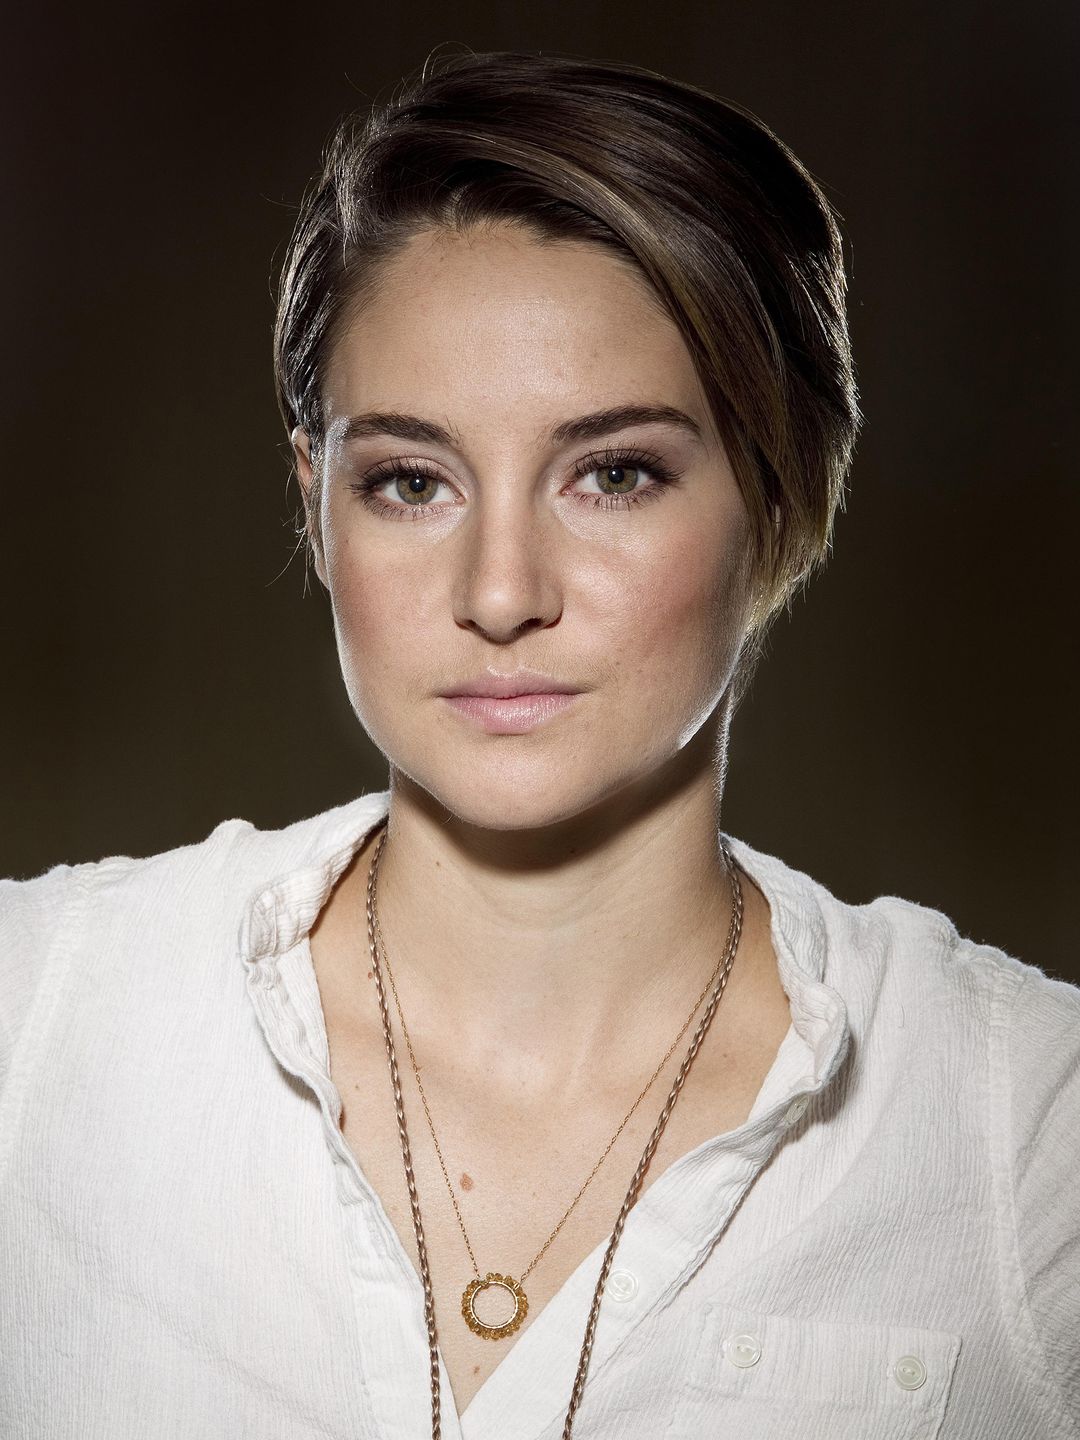 Shailene Woodley in real life